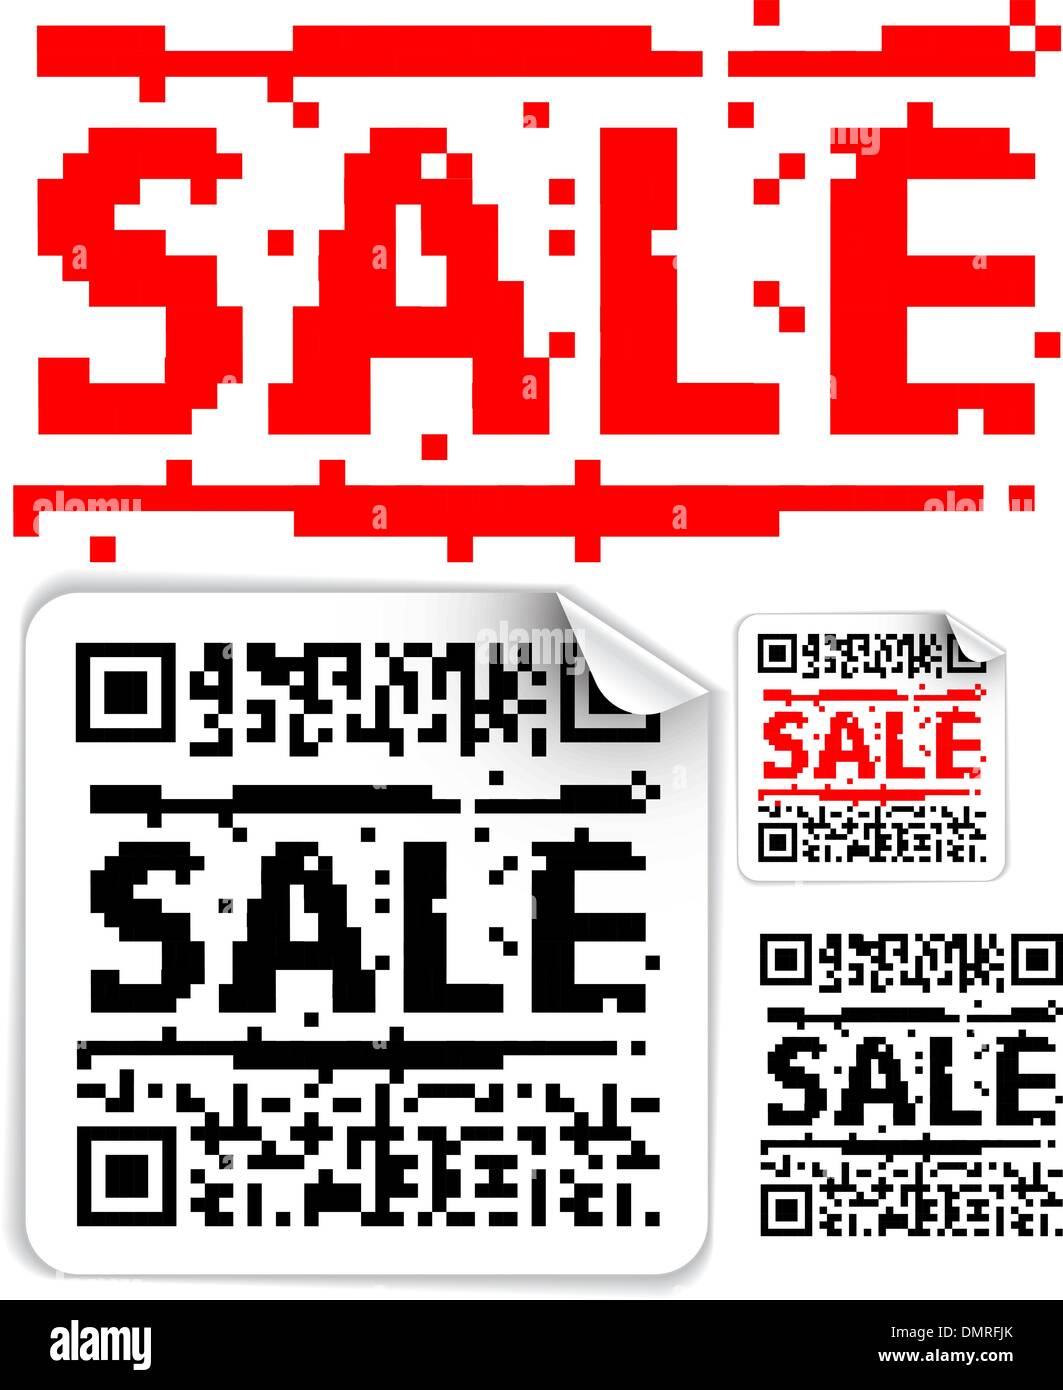 Set of sale labels with qr codes Stock Vector